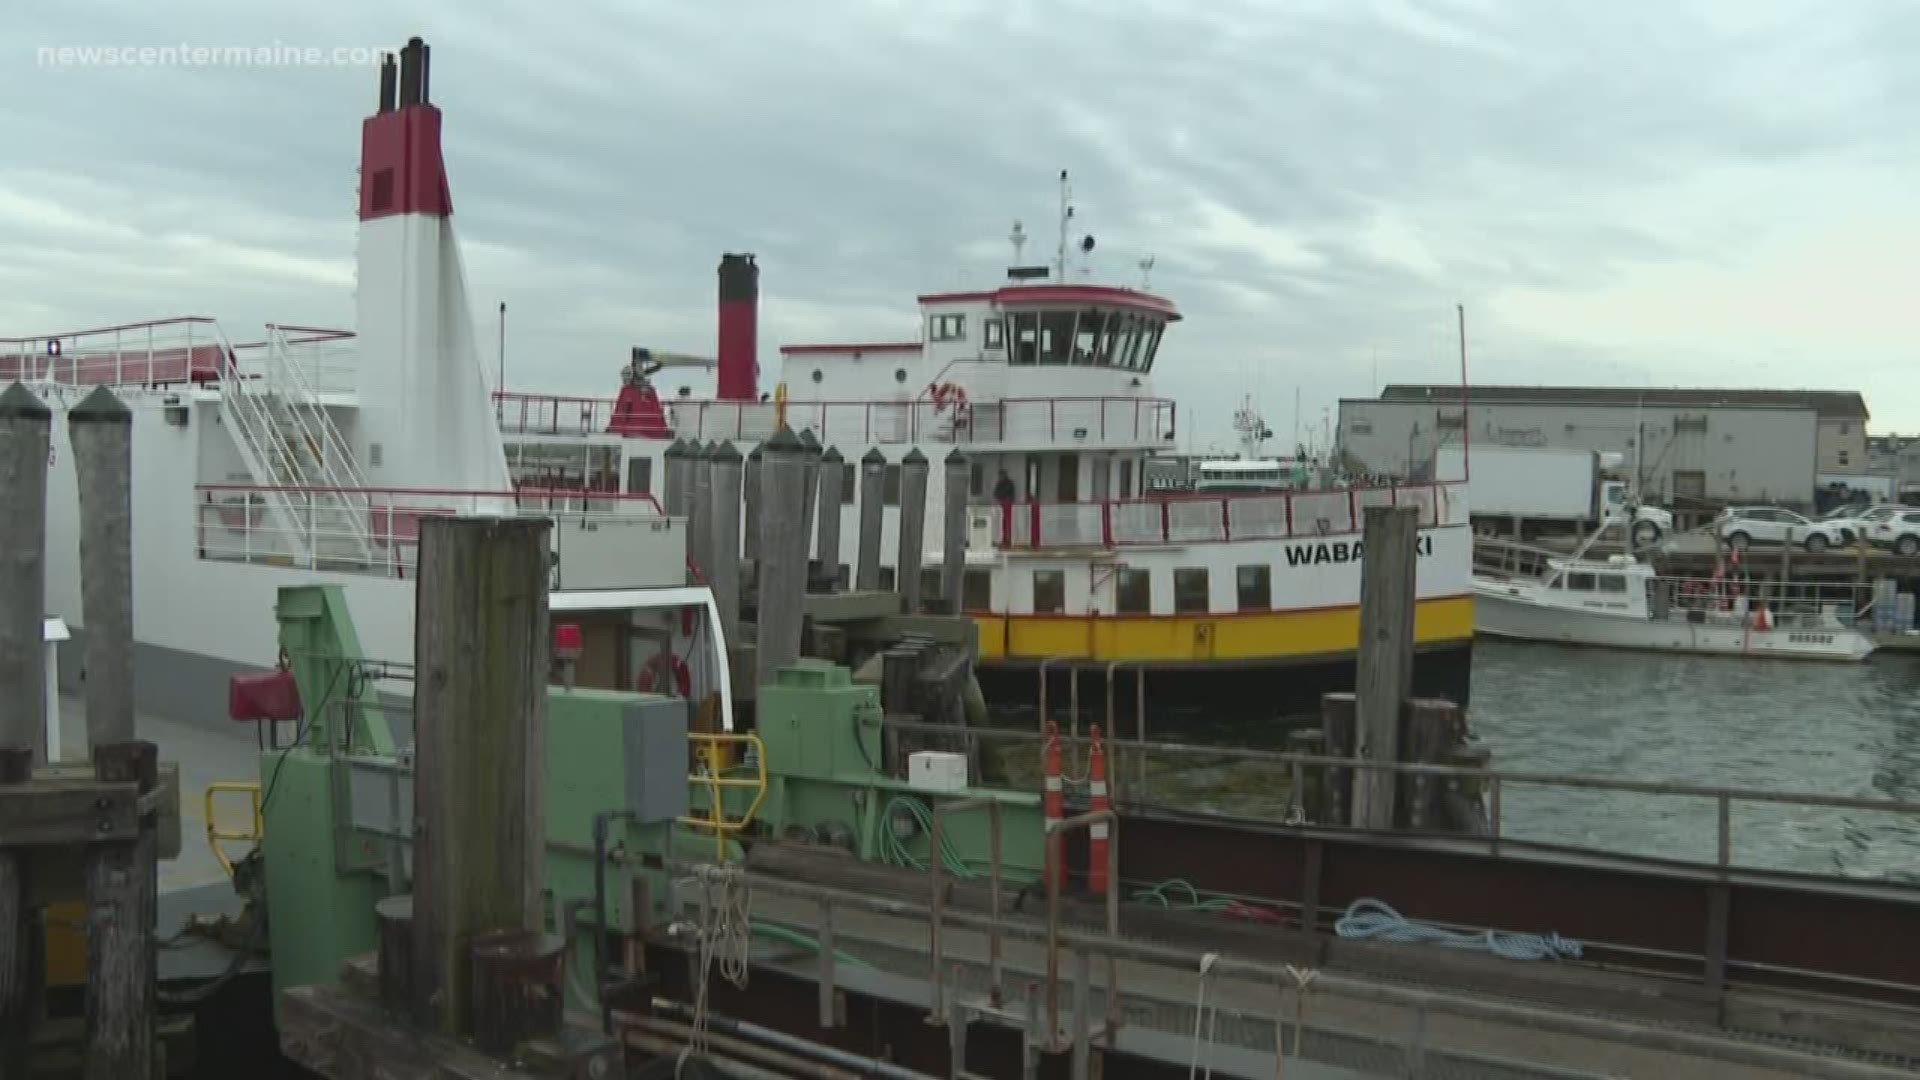 With the implementation of a bigger ferry to and from Peaks Island, residents are concerned about parking availability on the mainland.